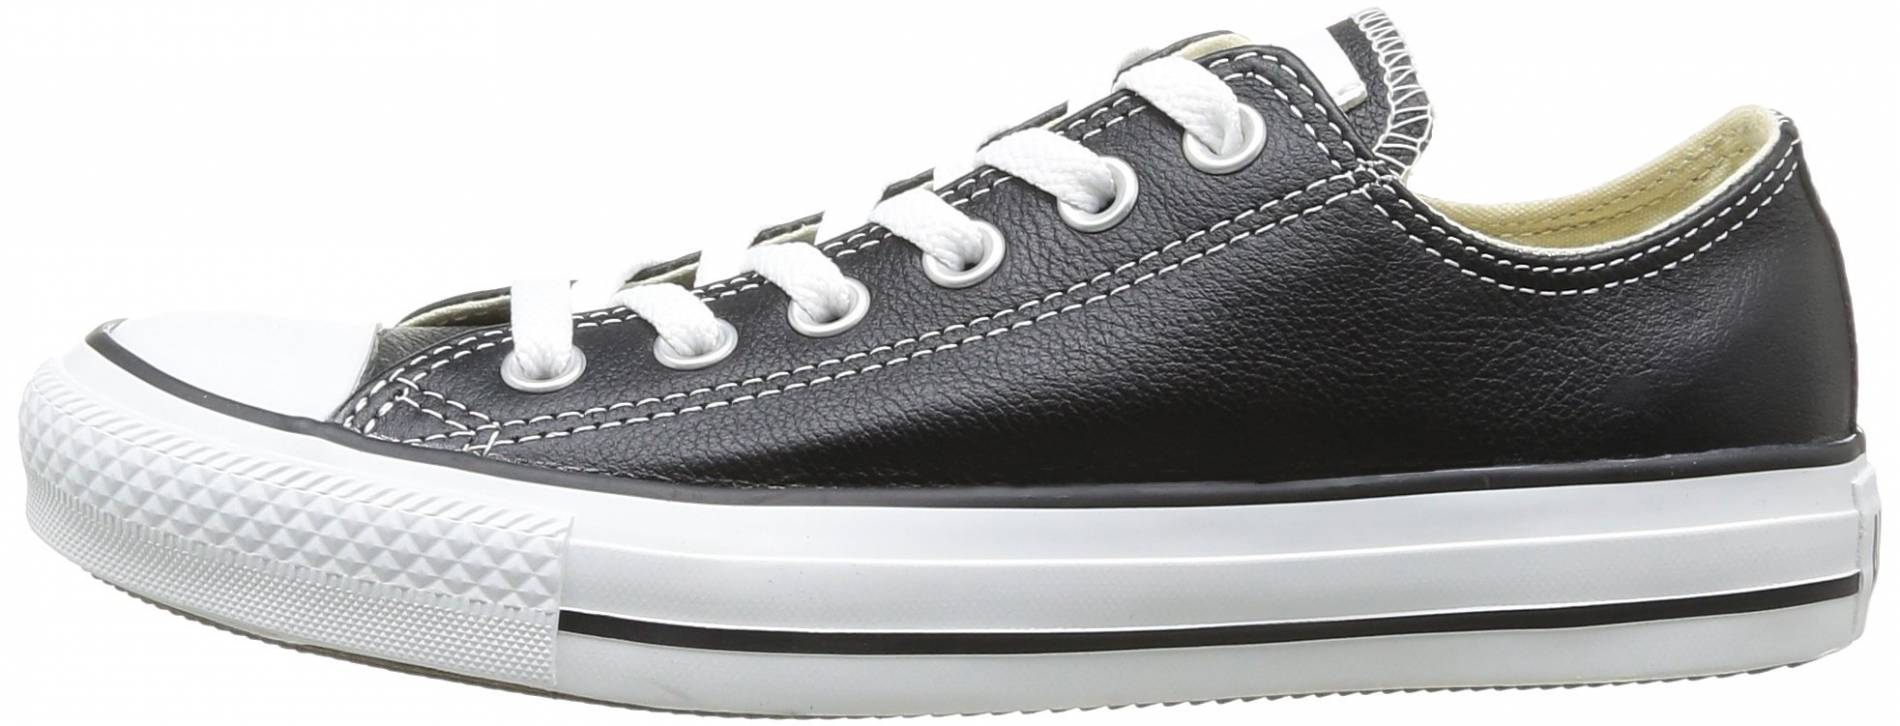 grey leather converse mens